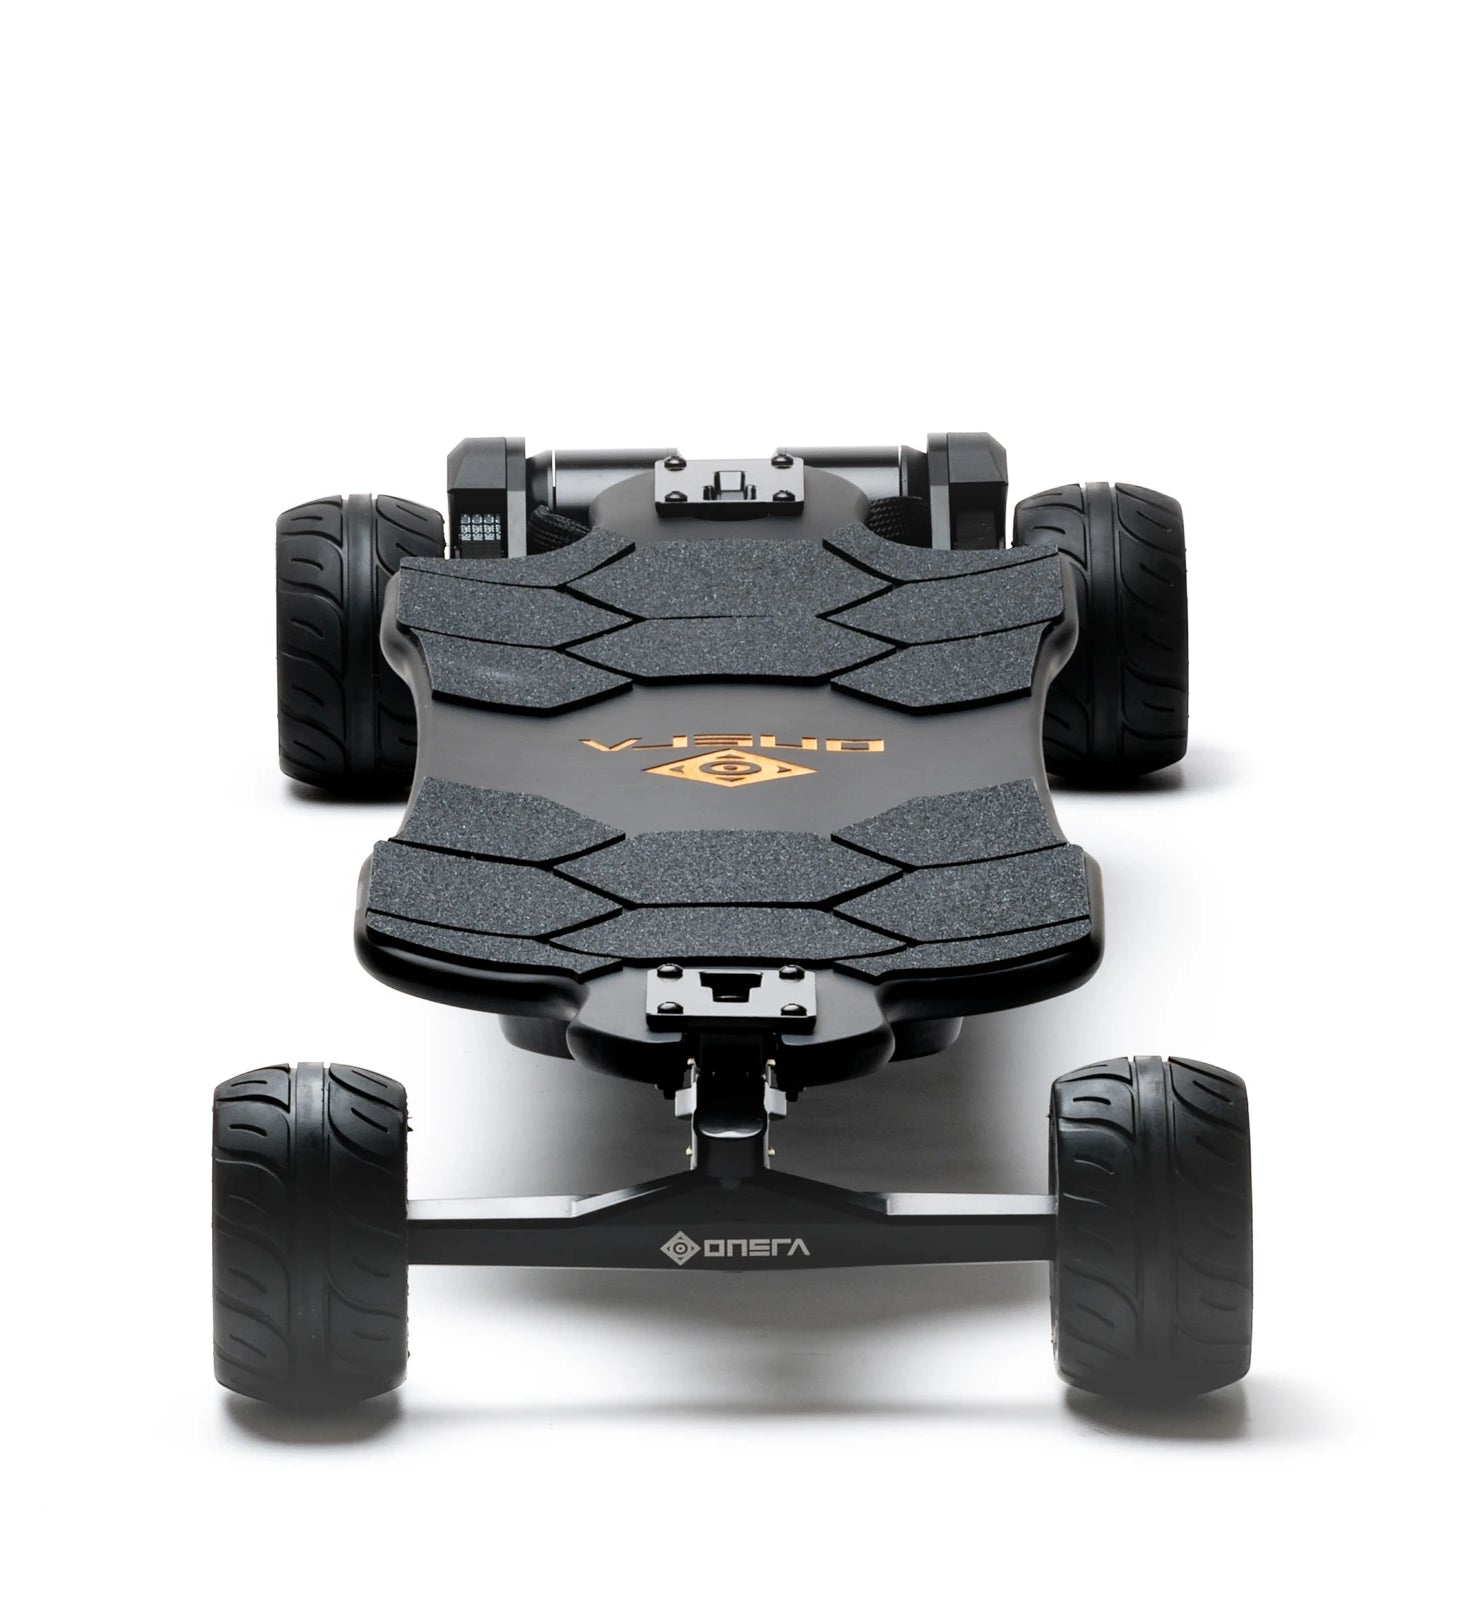 he best electric Skateboard 2 in 1. ONSRA Black Carve 2 Belt Drive with 115mm Rubber Wheels or 150mm AT wheels. Electric Longboard with double kingpin and Belt Drive.